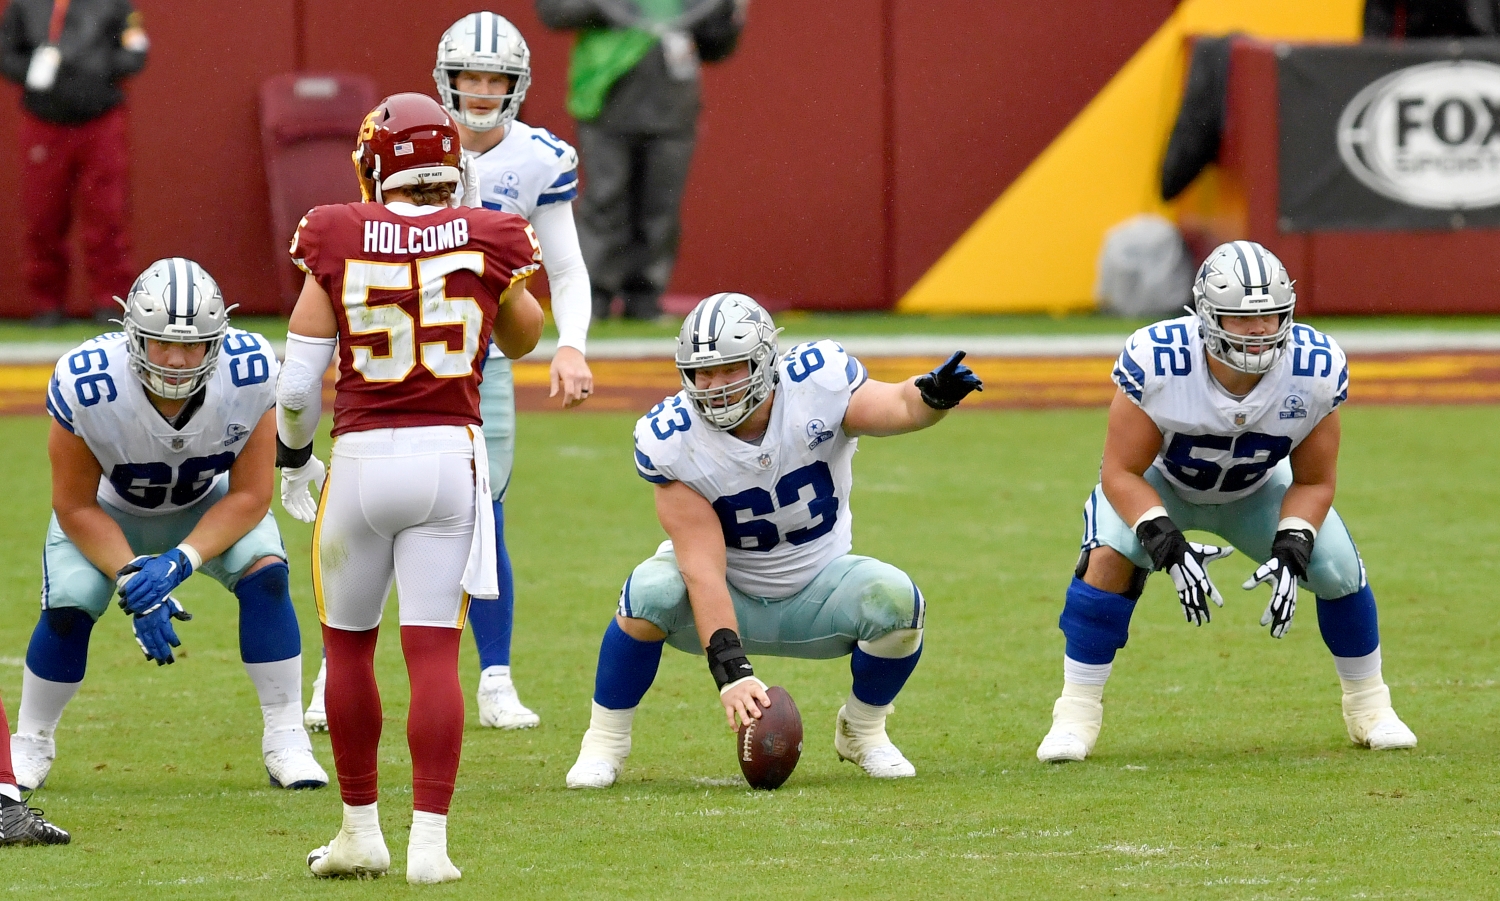 Cowboys center Tyler Biadasz points at a defender before snapping the ball.